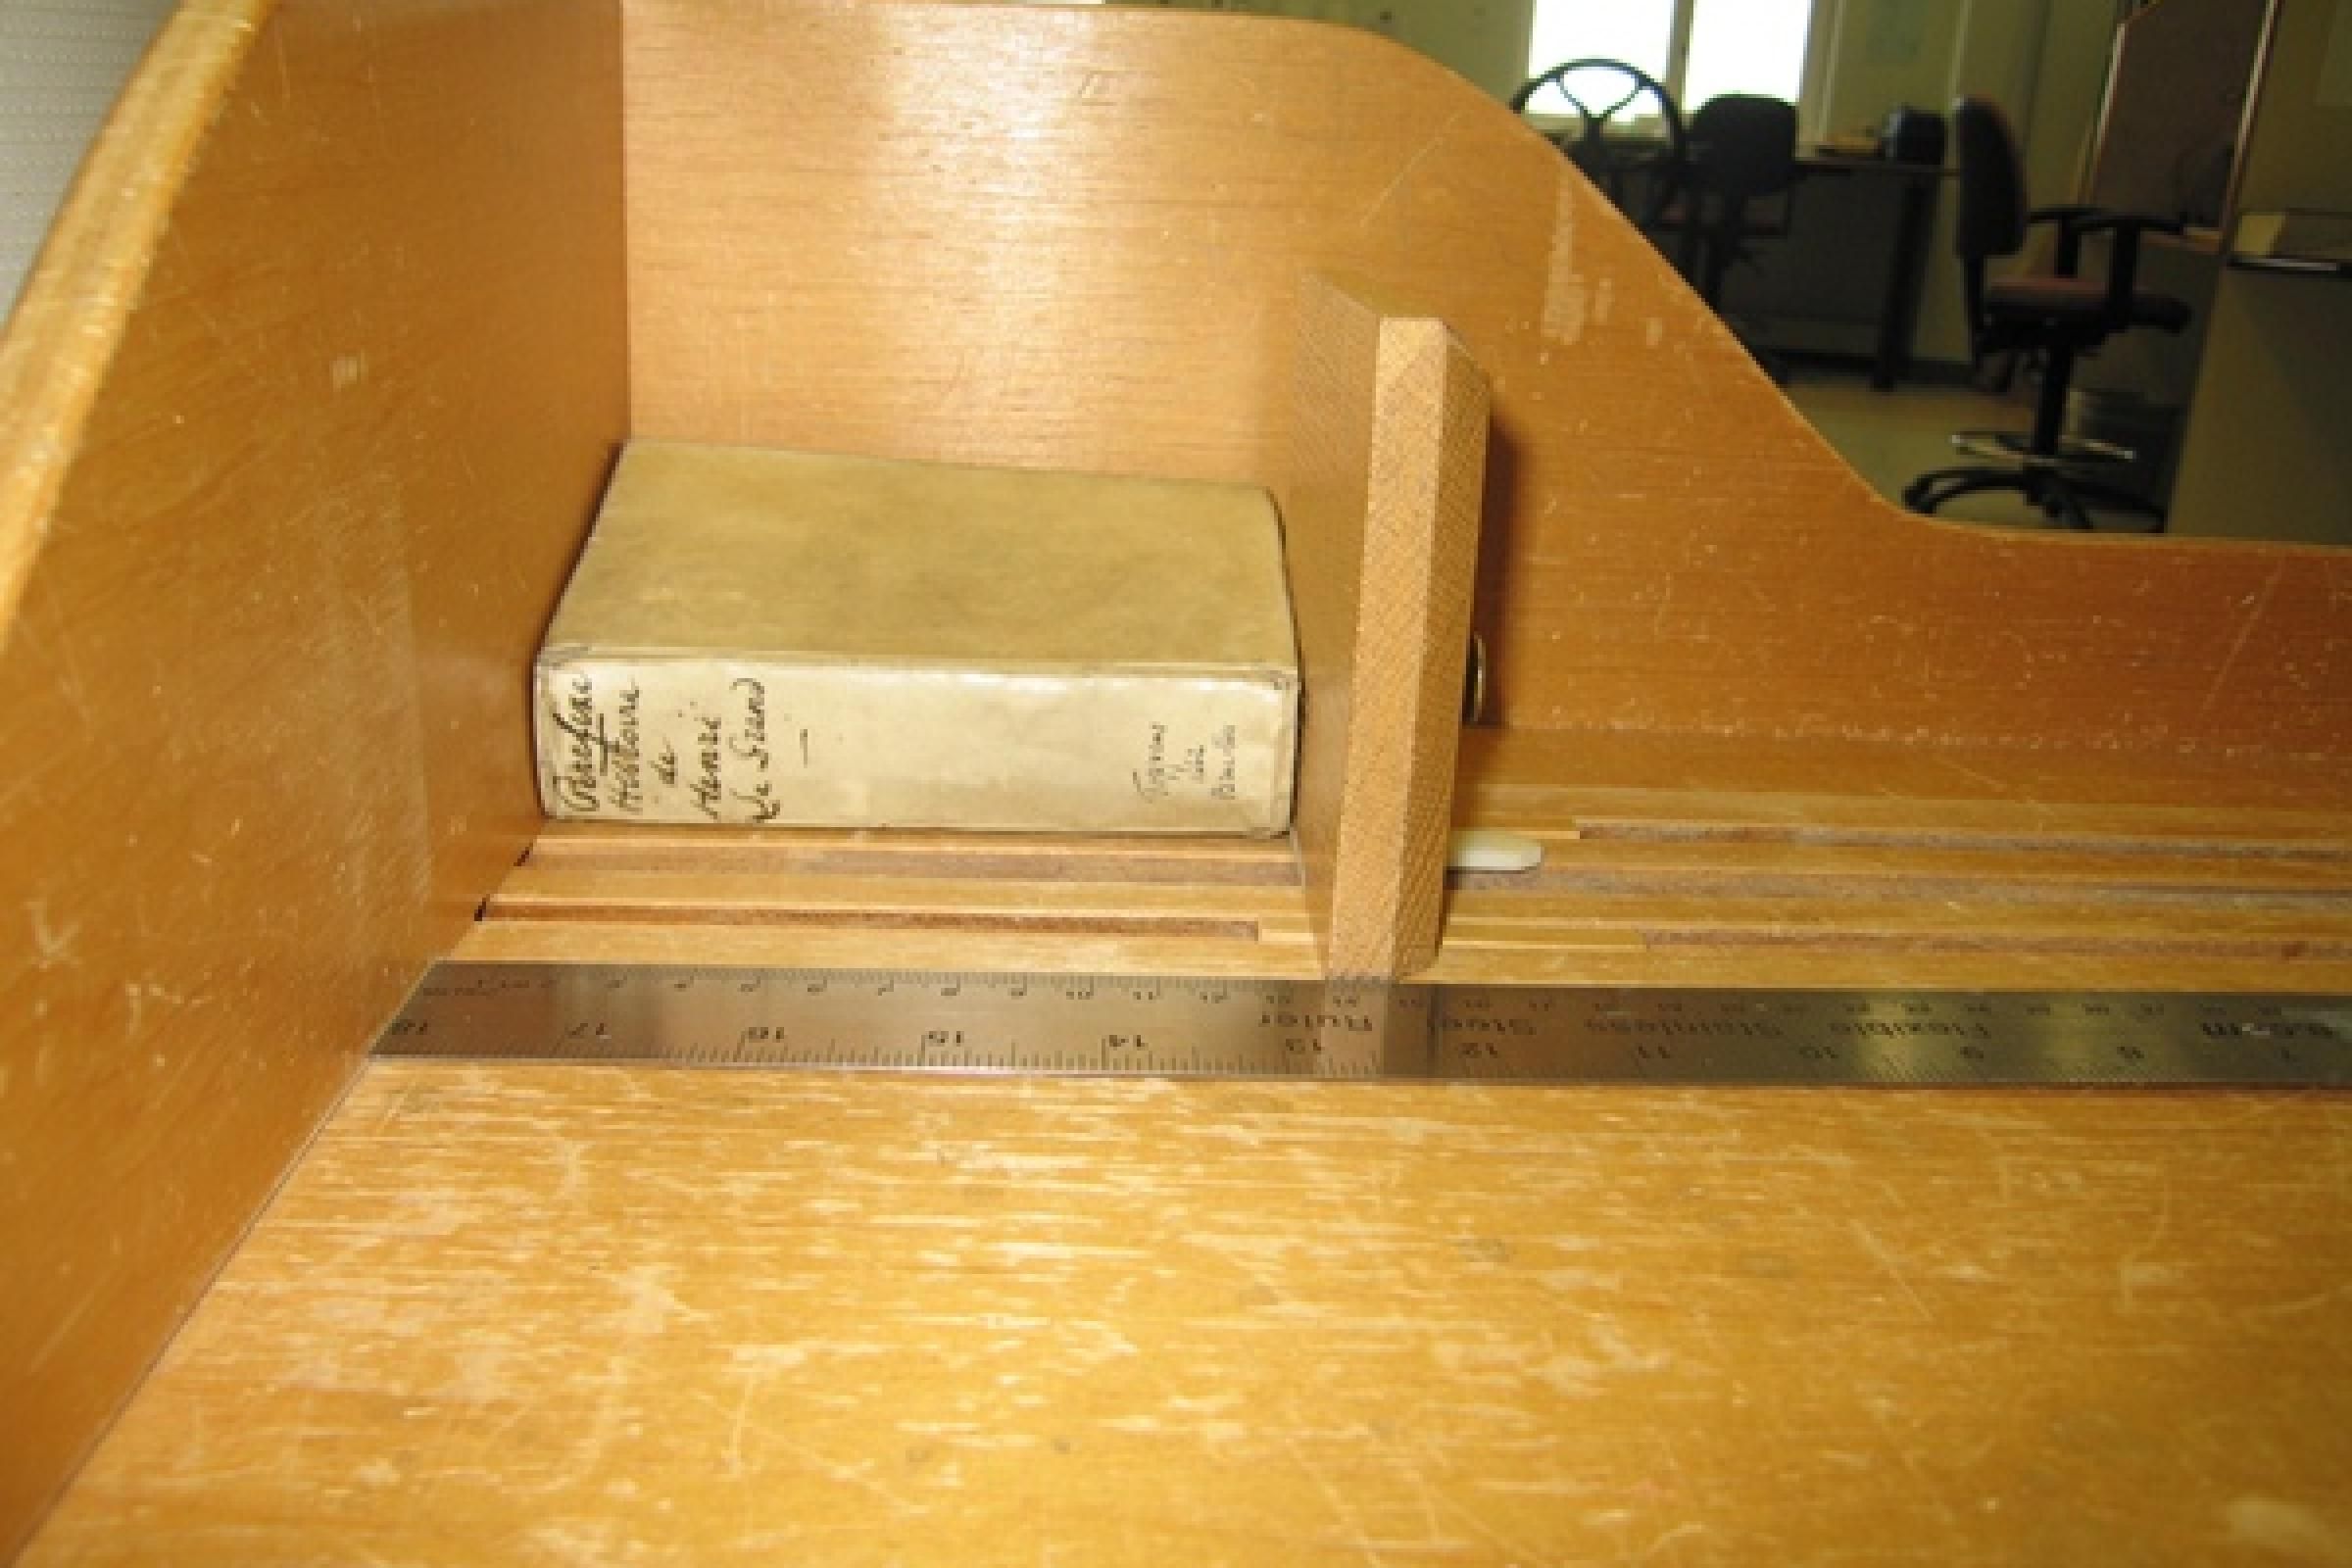 Measuring the height, width and depth (each at three separate points) of book